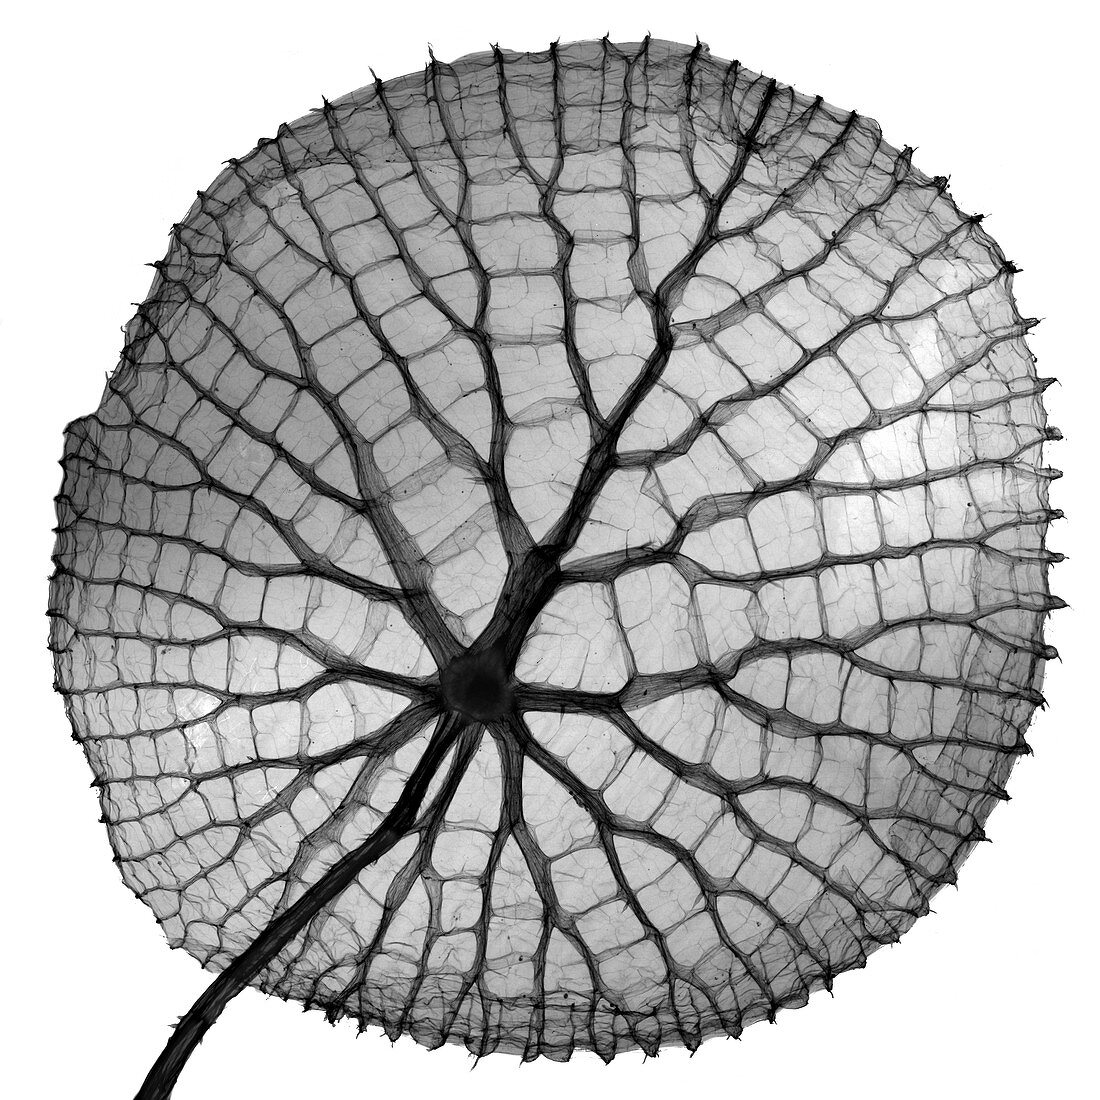 Giant Amazon water lily,X-ray